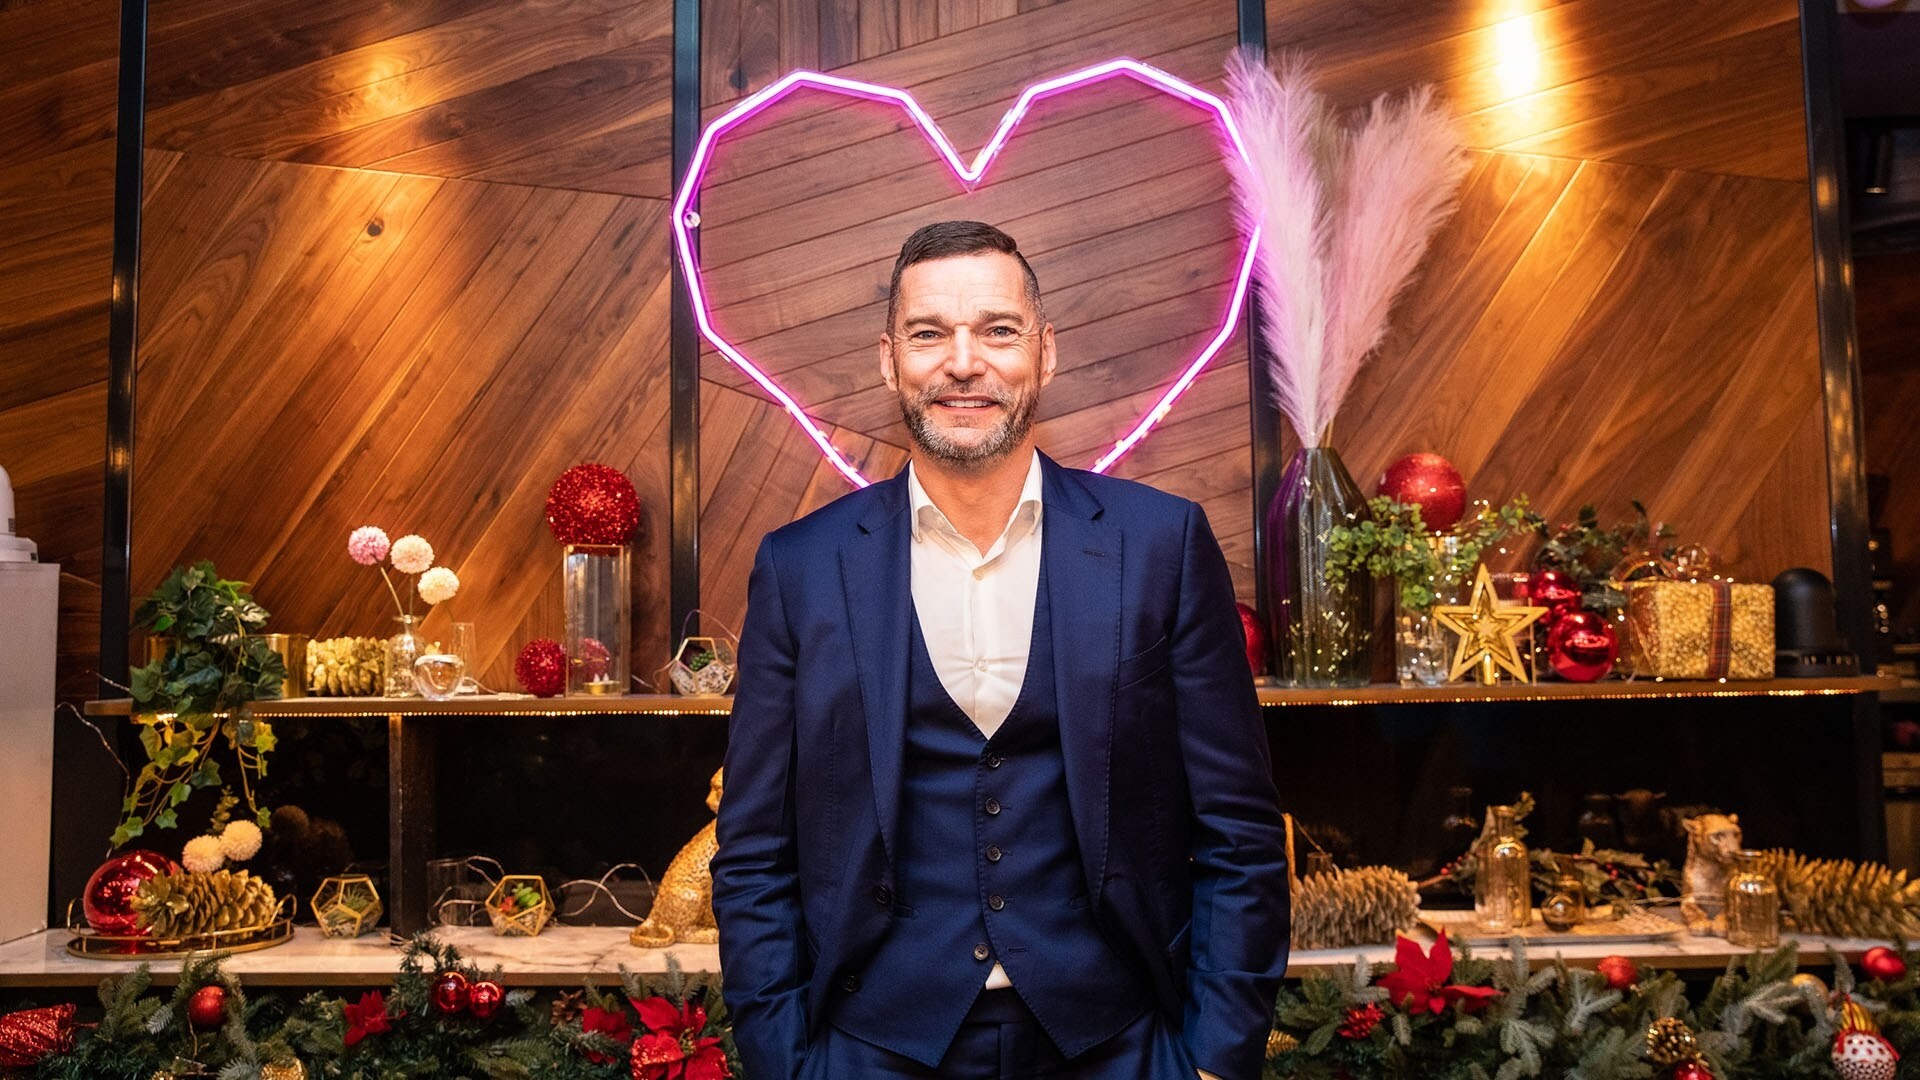 First Dates at Christmas - All 4